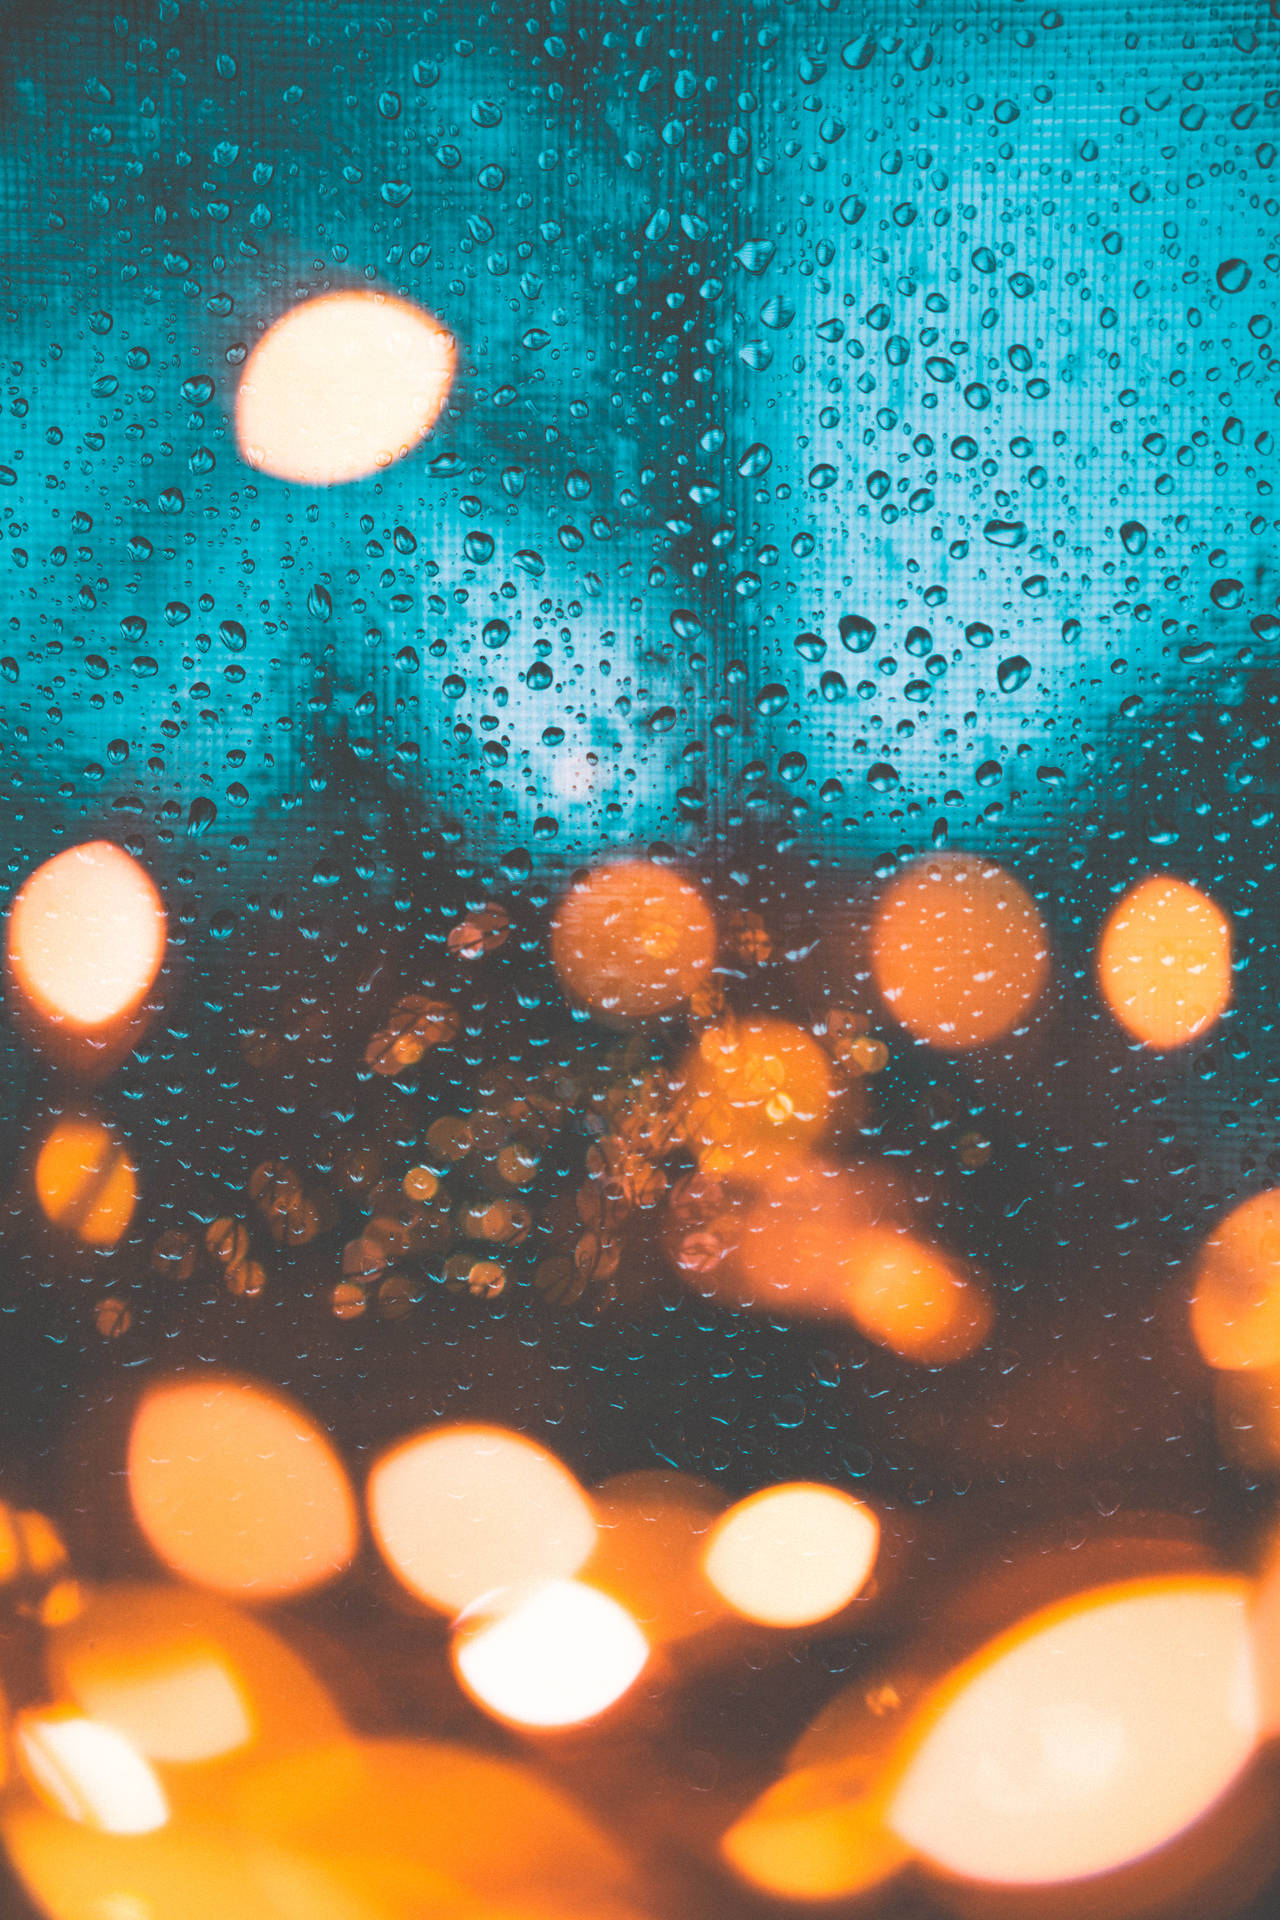 Window Water Droplets Background